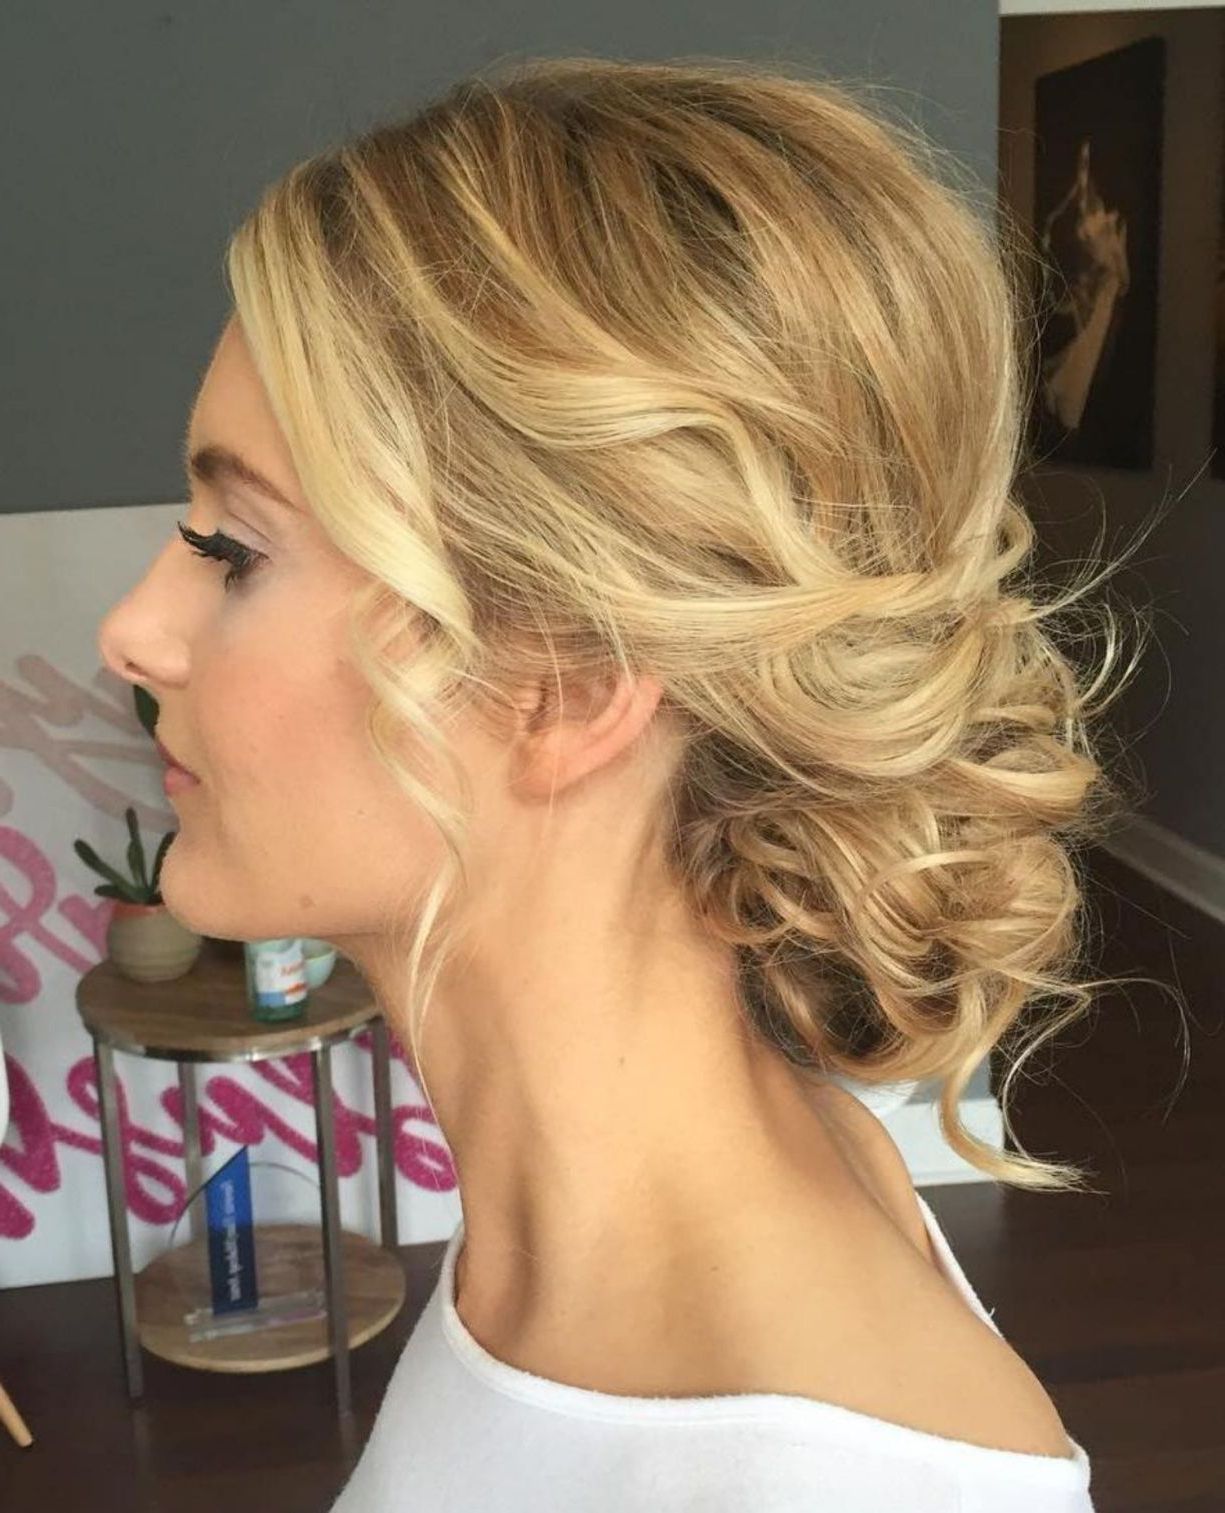 Hair Today Pertaining To Most Up To Date Wavy And Wispy Blonde Updo Wedding Hairstyles (View 3 of 20)